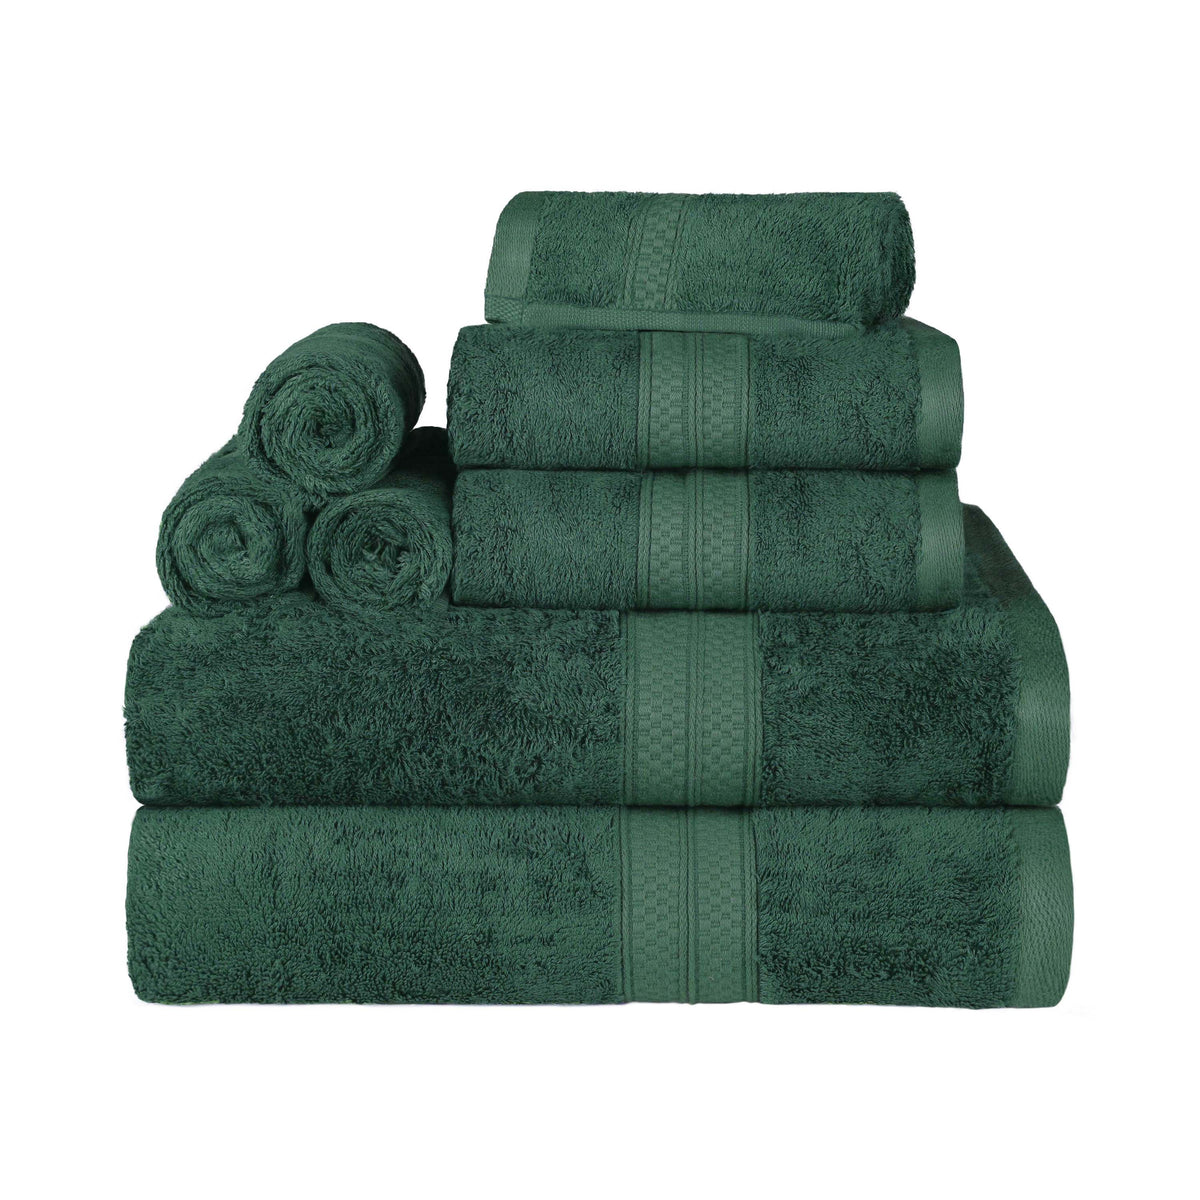 Ultra-Soft Rayon from Bamboo Cotton Blend 8 Piece Towel Set